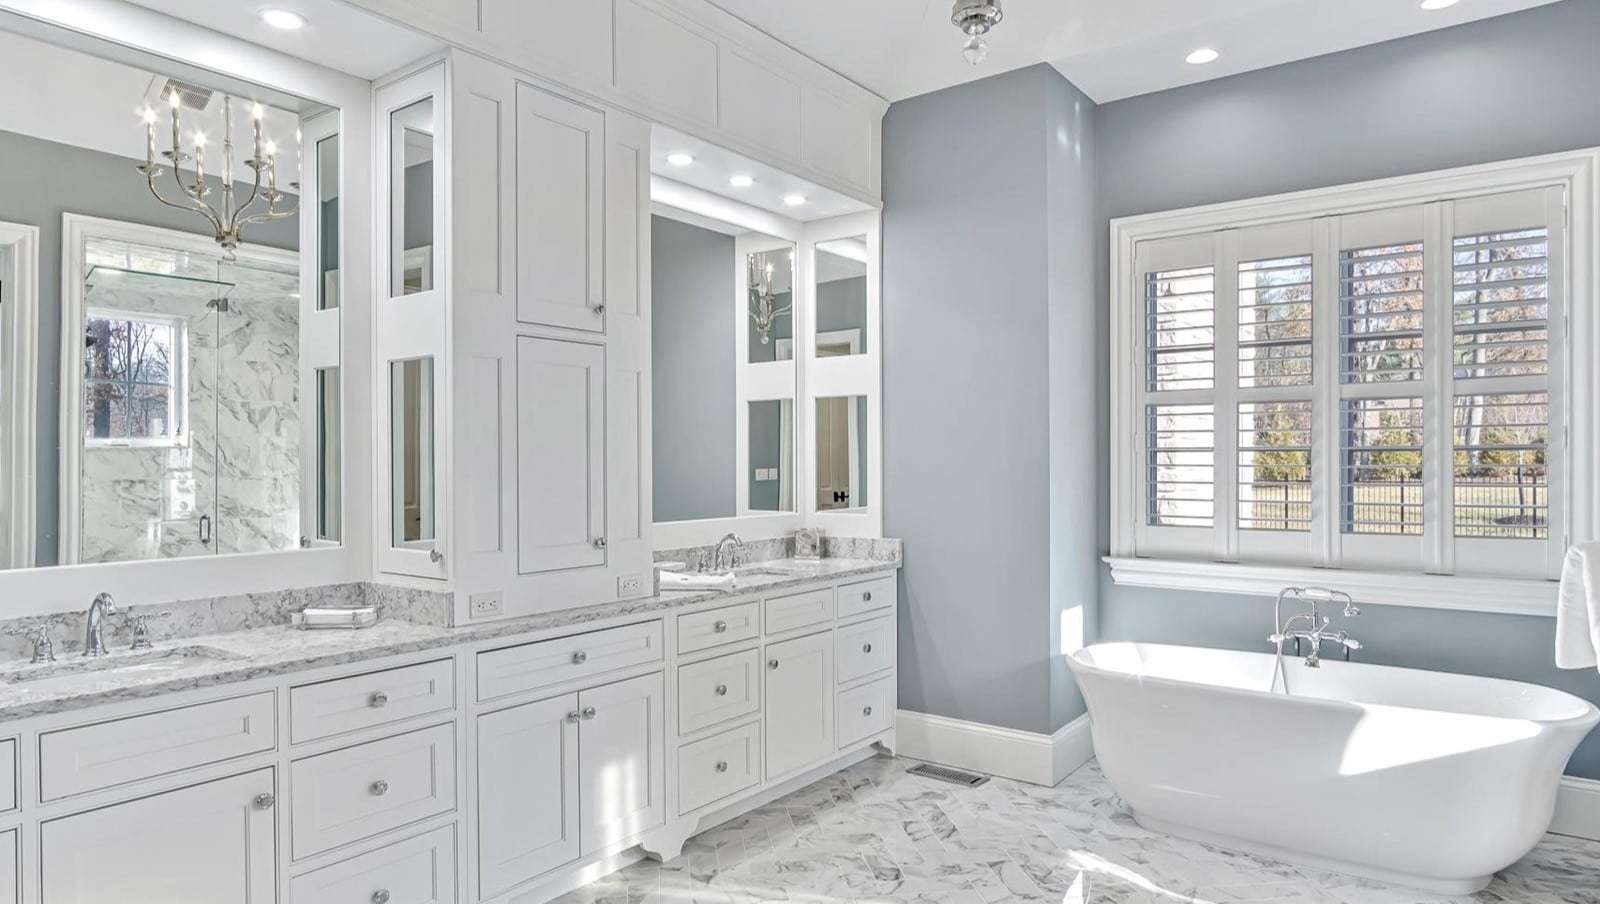 Custom master bathroom vanity in white finish with framed mirrors and custom upper cabinet.  Freestanding tub sits below window perpendicular to the vanity.